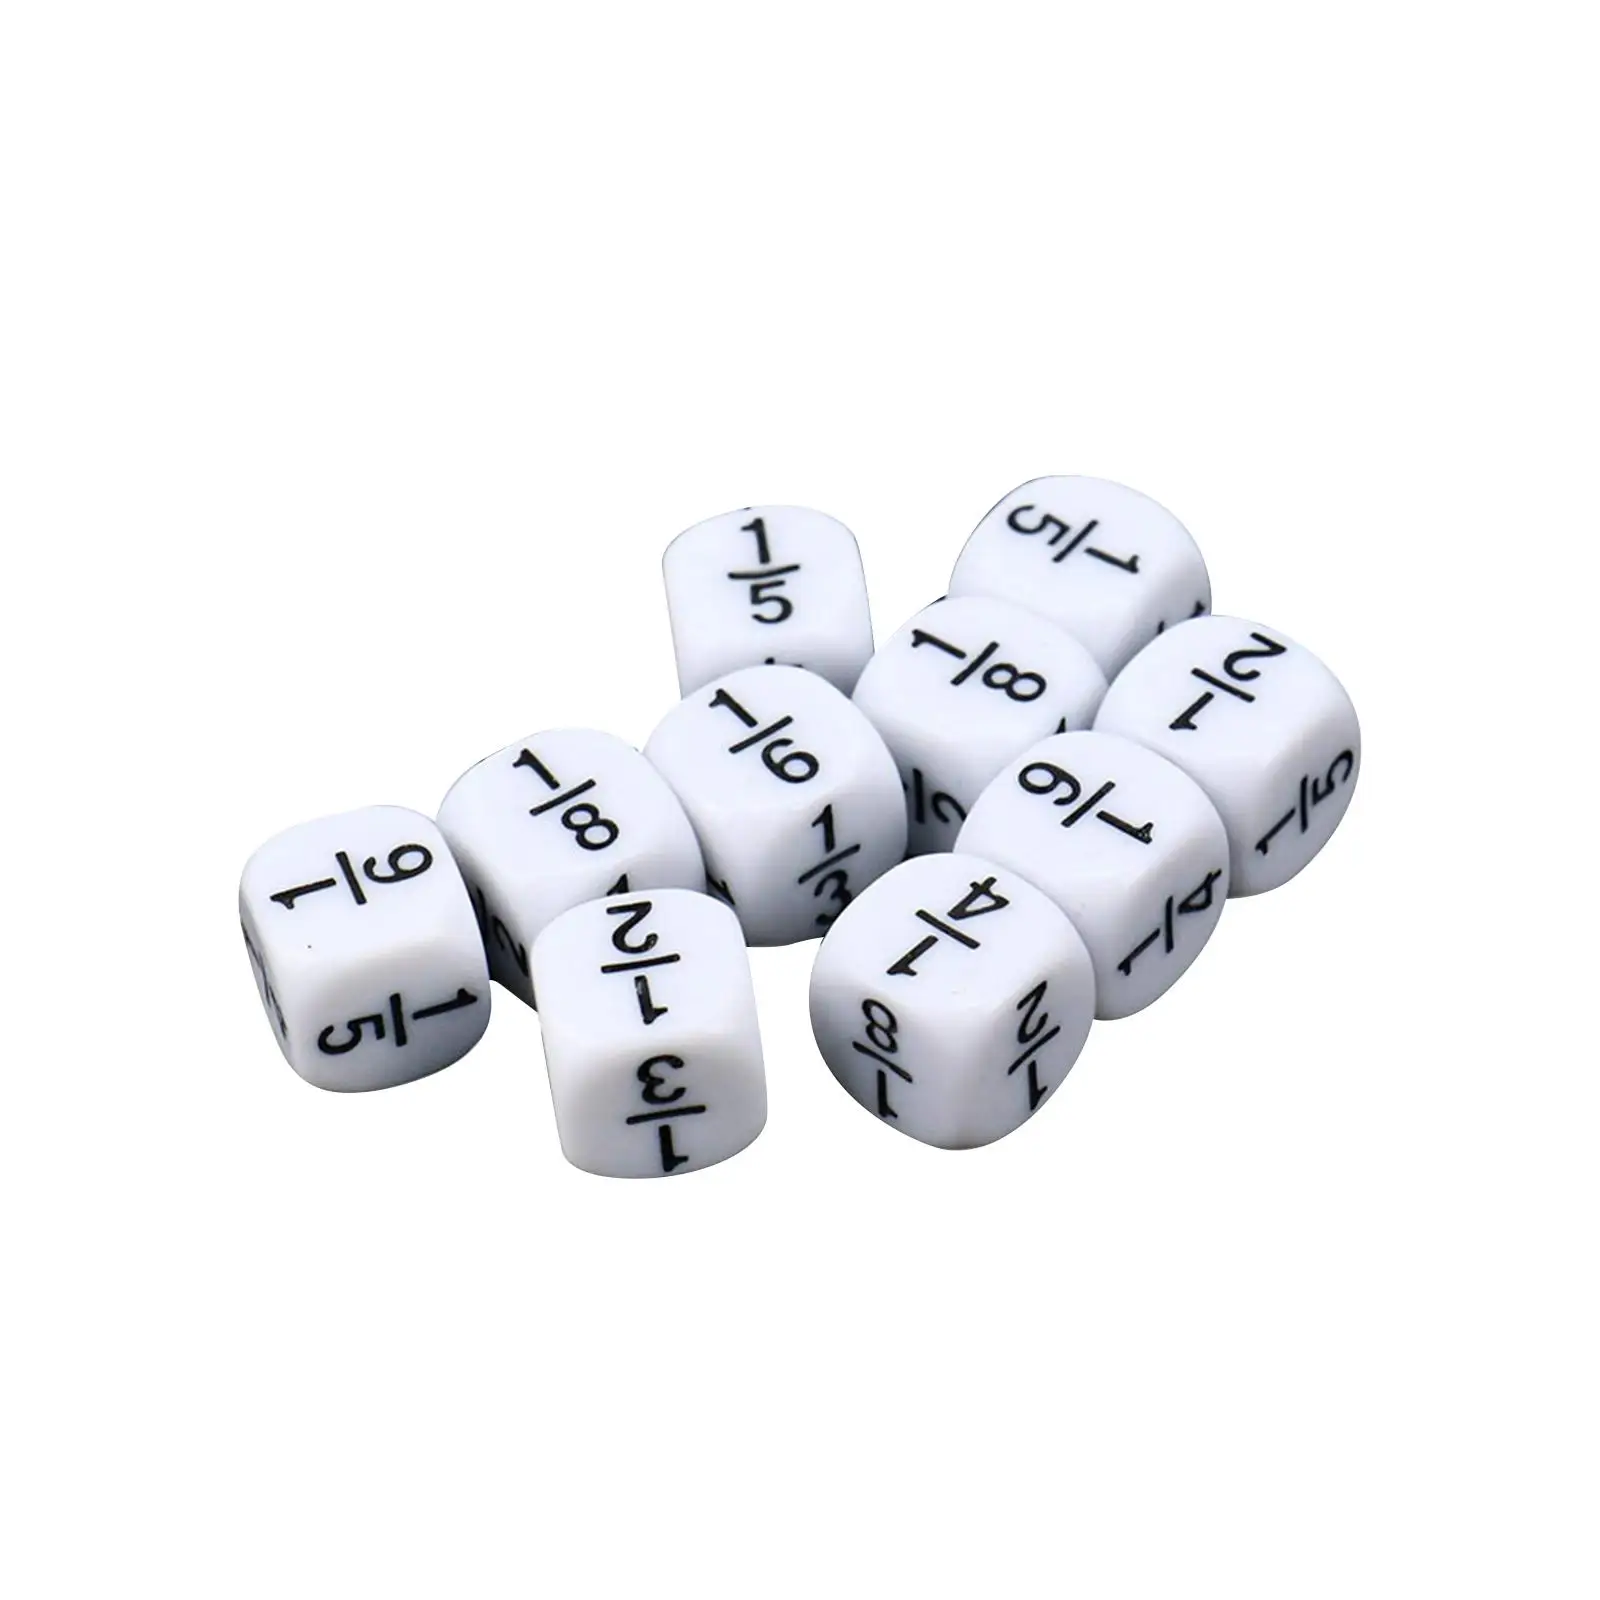 10Pcs Fraction Dice Math Teaching Set Educational Toy Durable for Classroom Lightweight